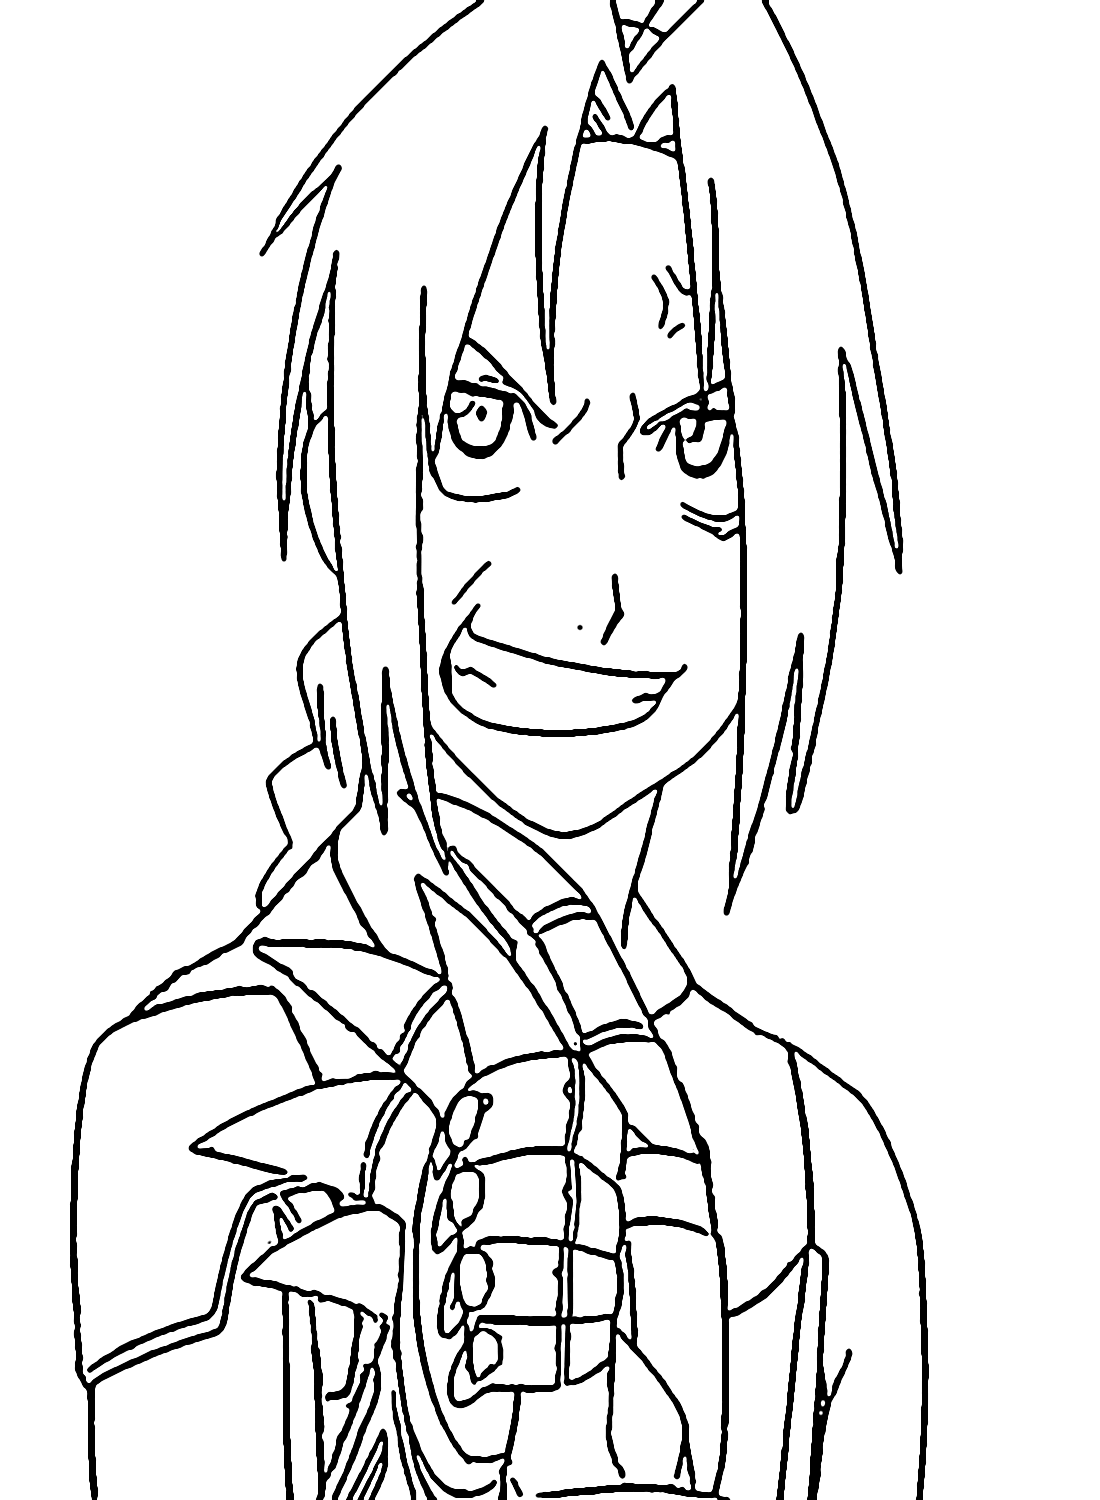 Happy Edward Elric from Anime